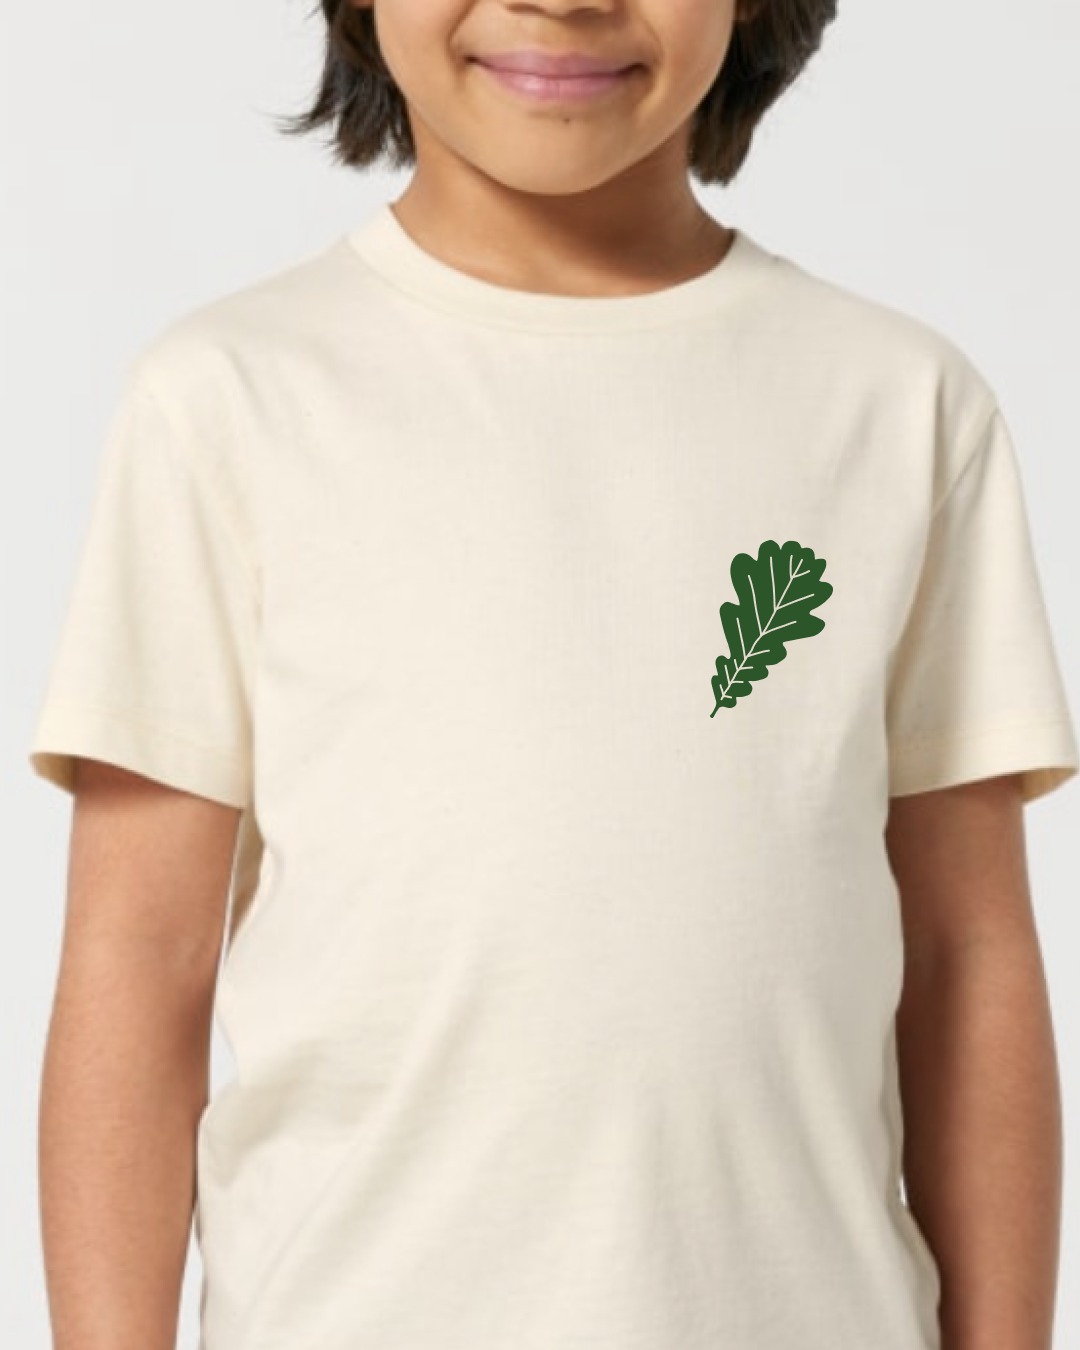 Large Kids Tee (ages 9-11)